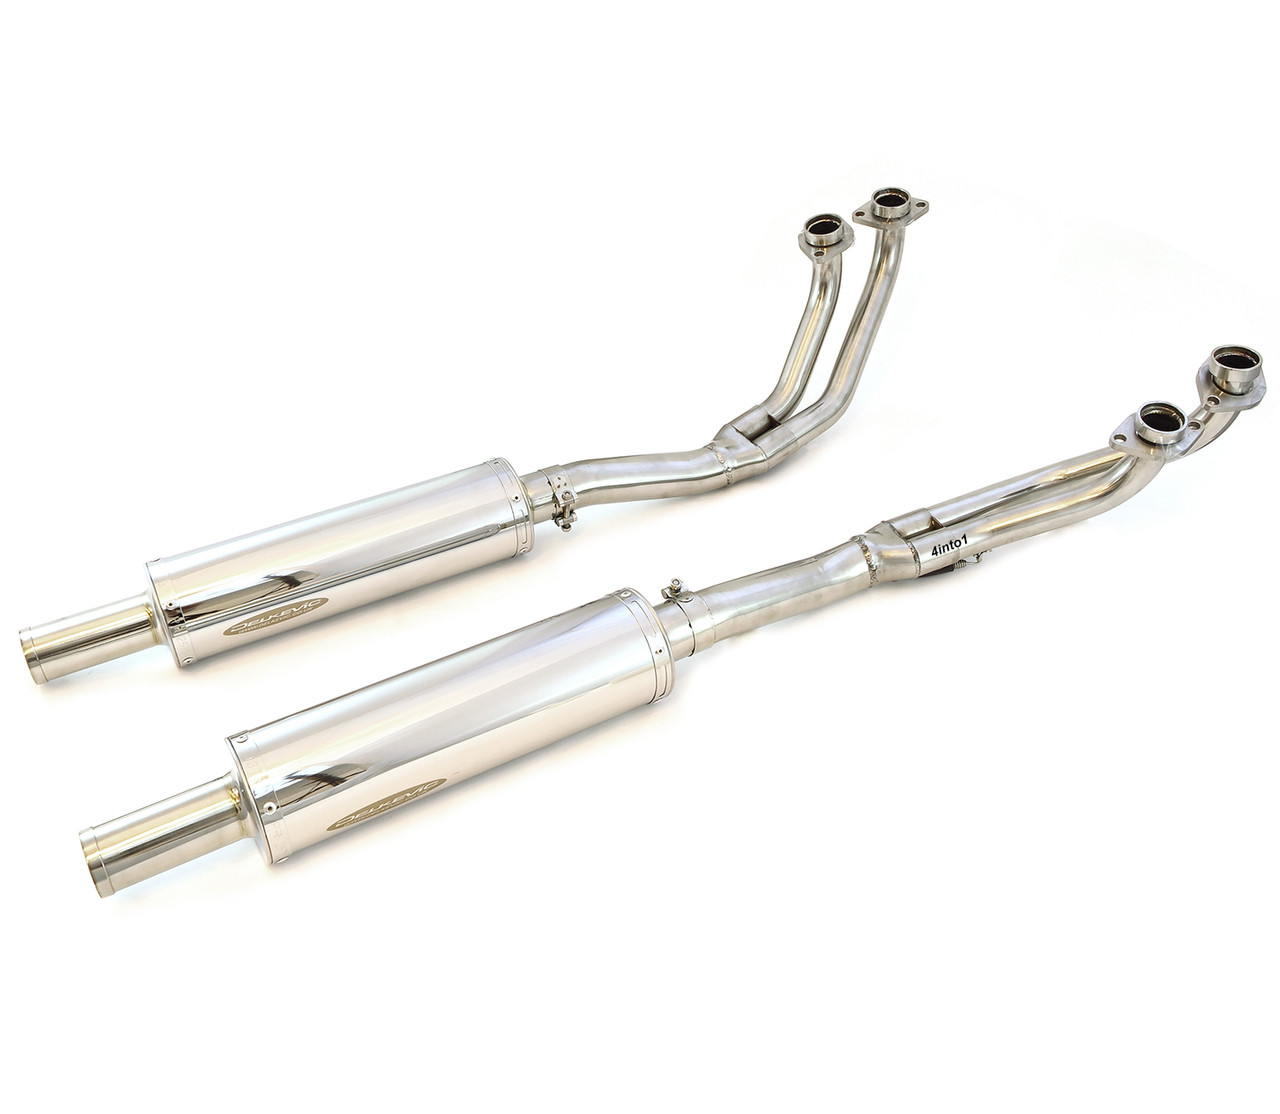 Delkevic 4into2 Stainless Steel Exhaust - Honda GL1000 Gold Wing